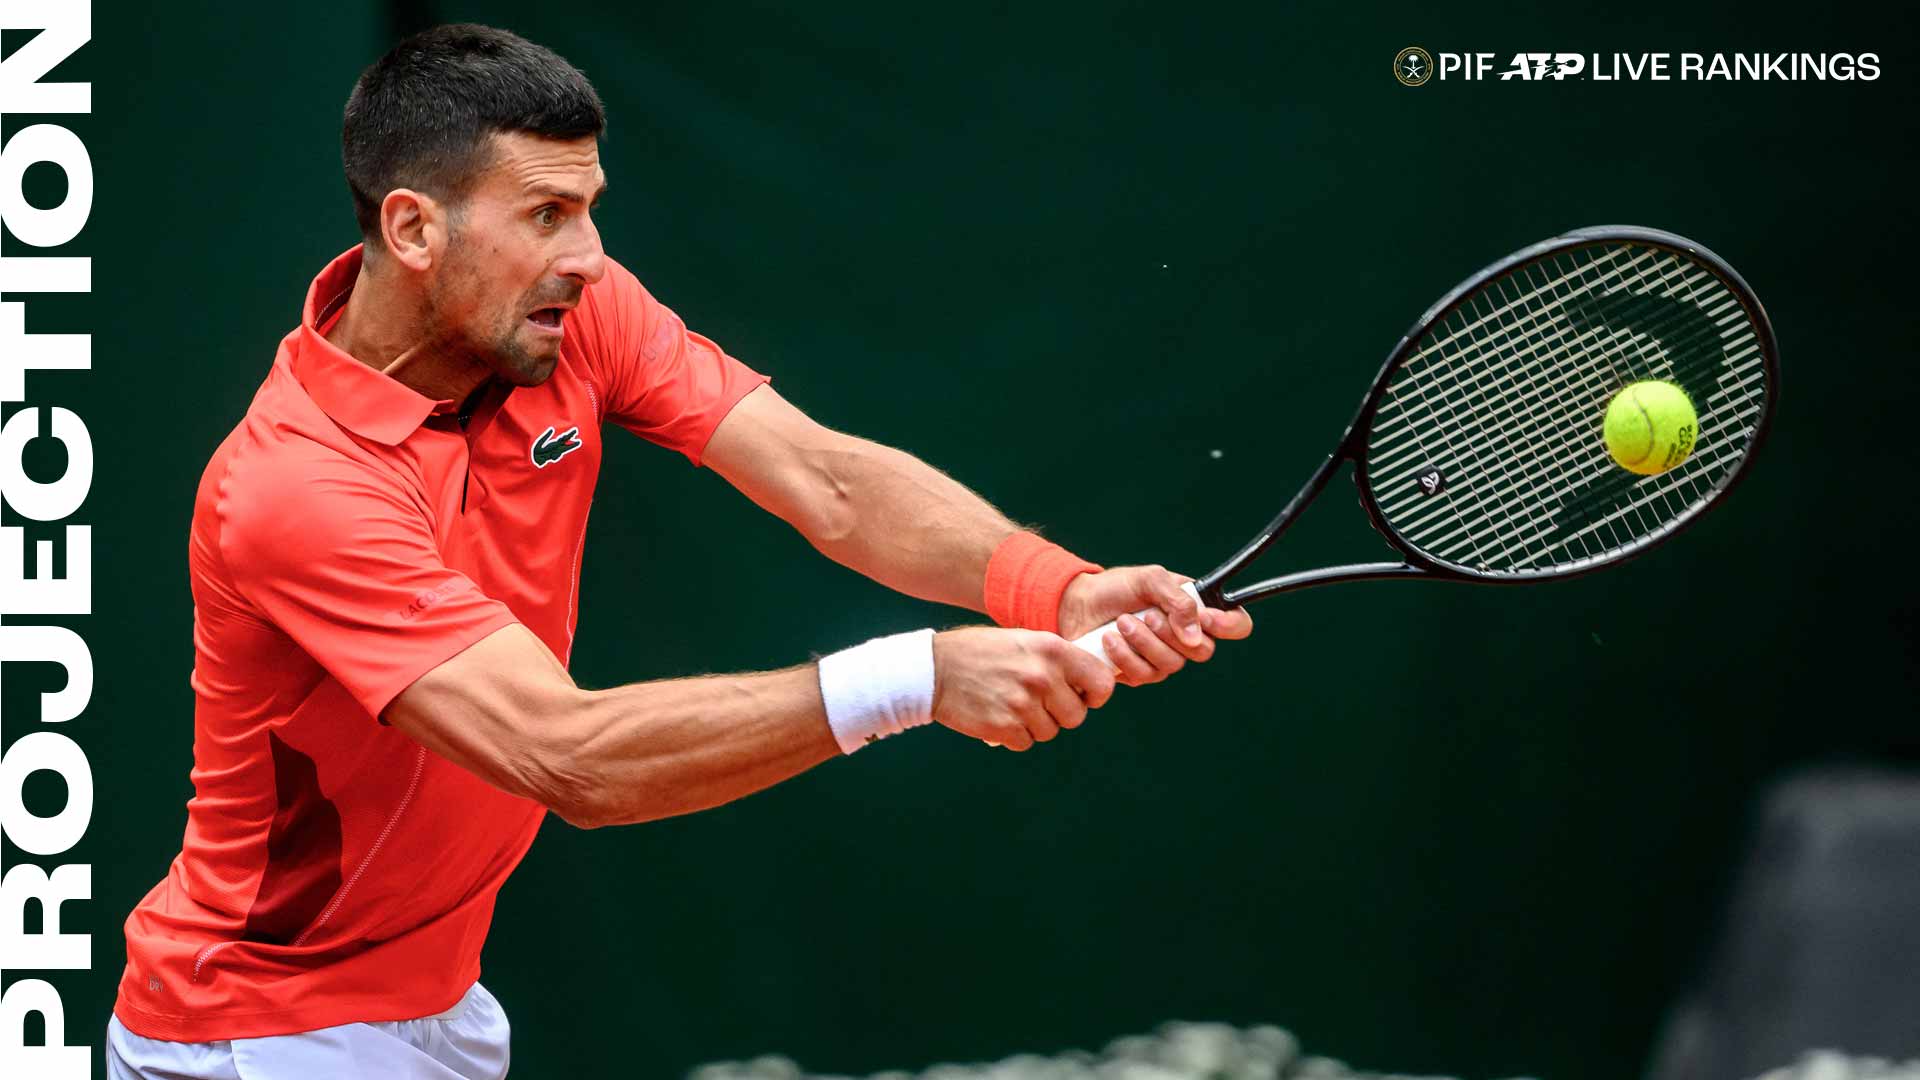 Novak Djokovic, the No. 1 player in the PIF ATP Live Rankings, is competing this week in Geneva.